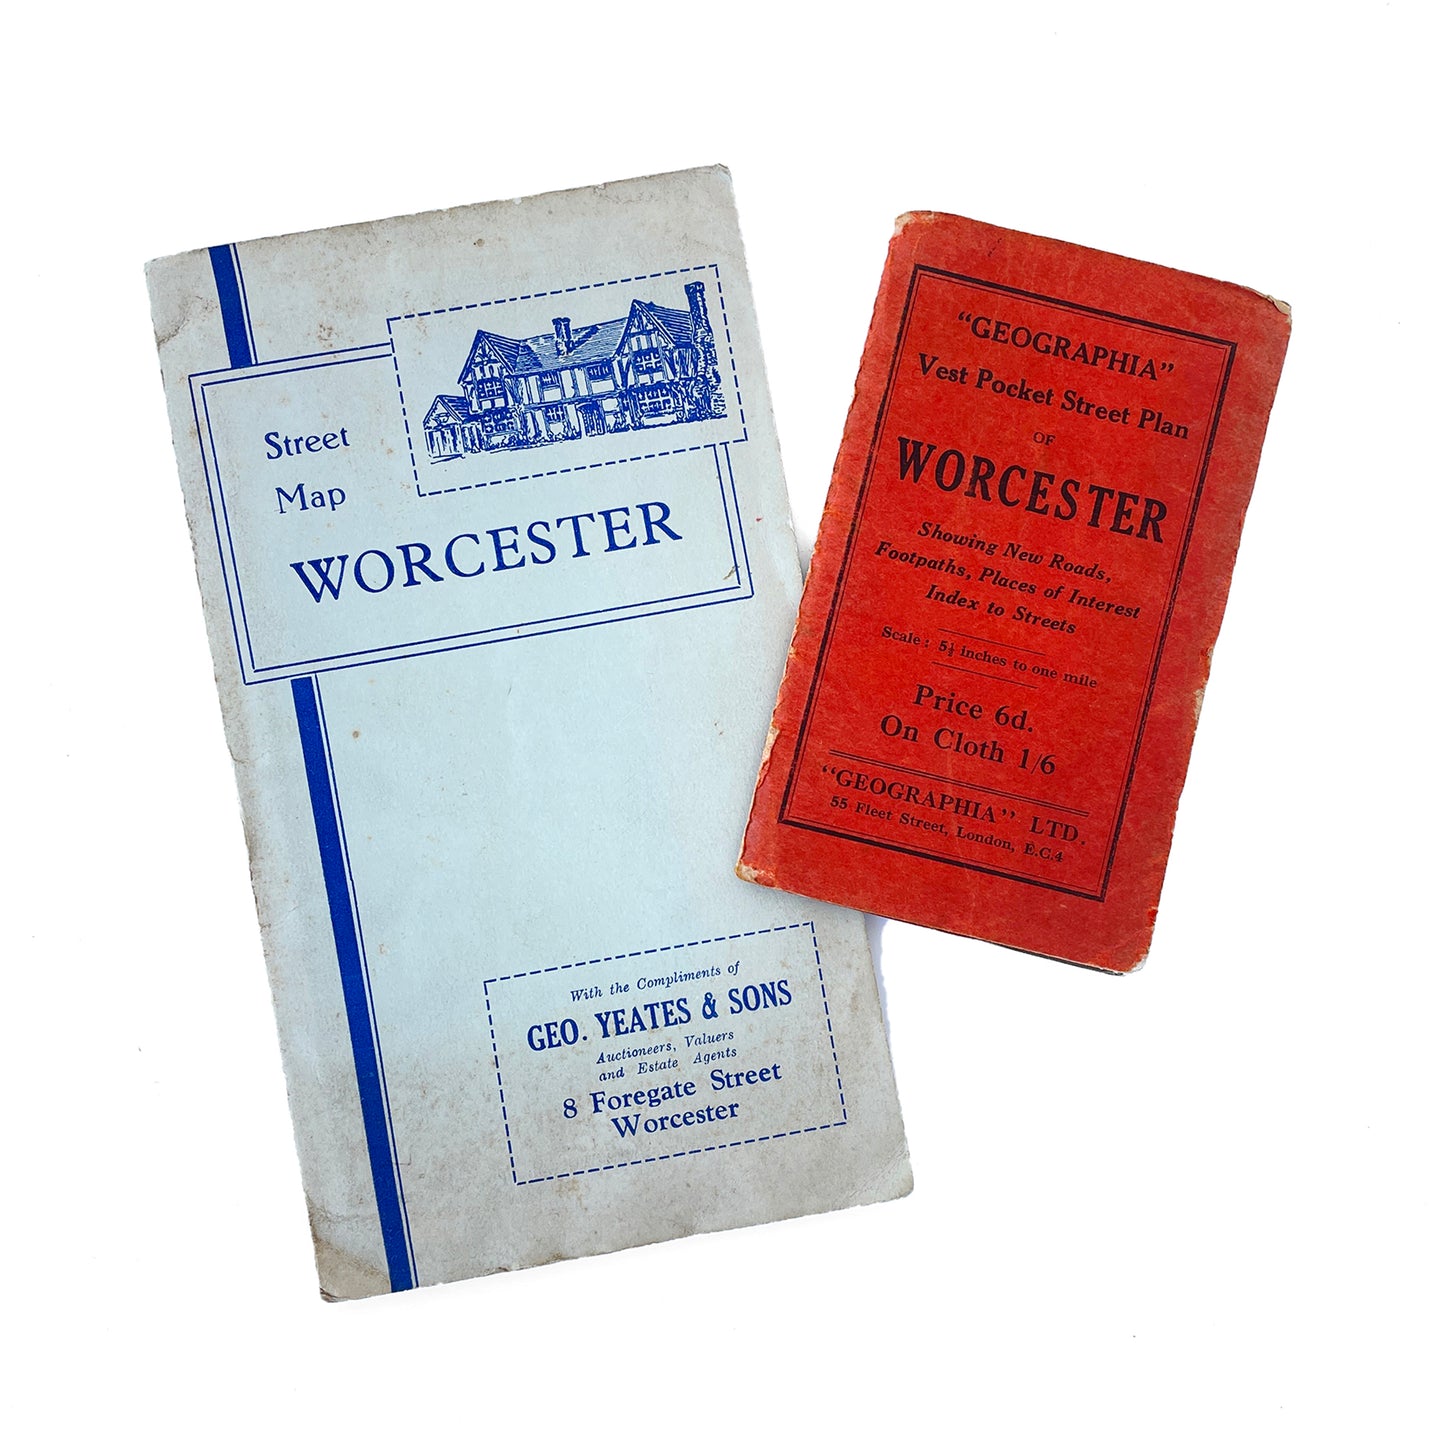 Early 20th Century ‘Geographia’ & Street Map of Worcester - Sukie